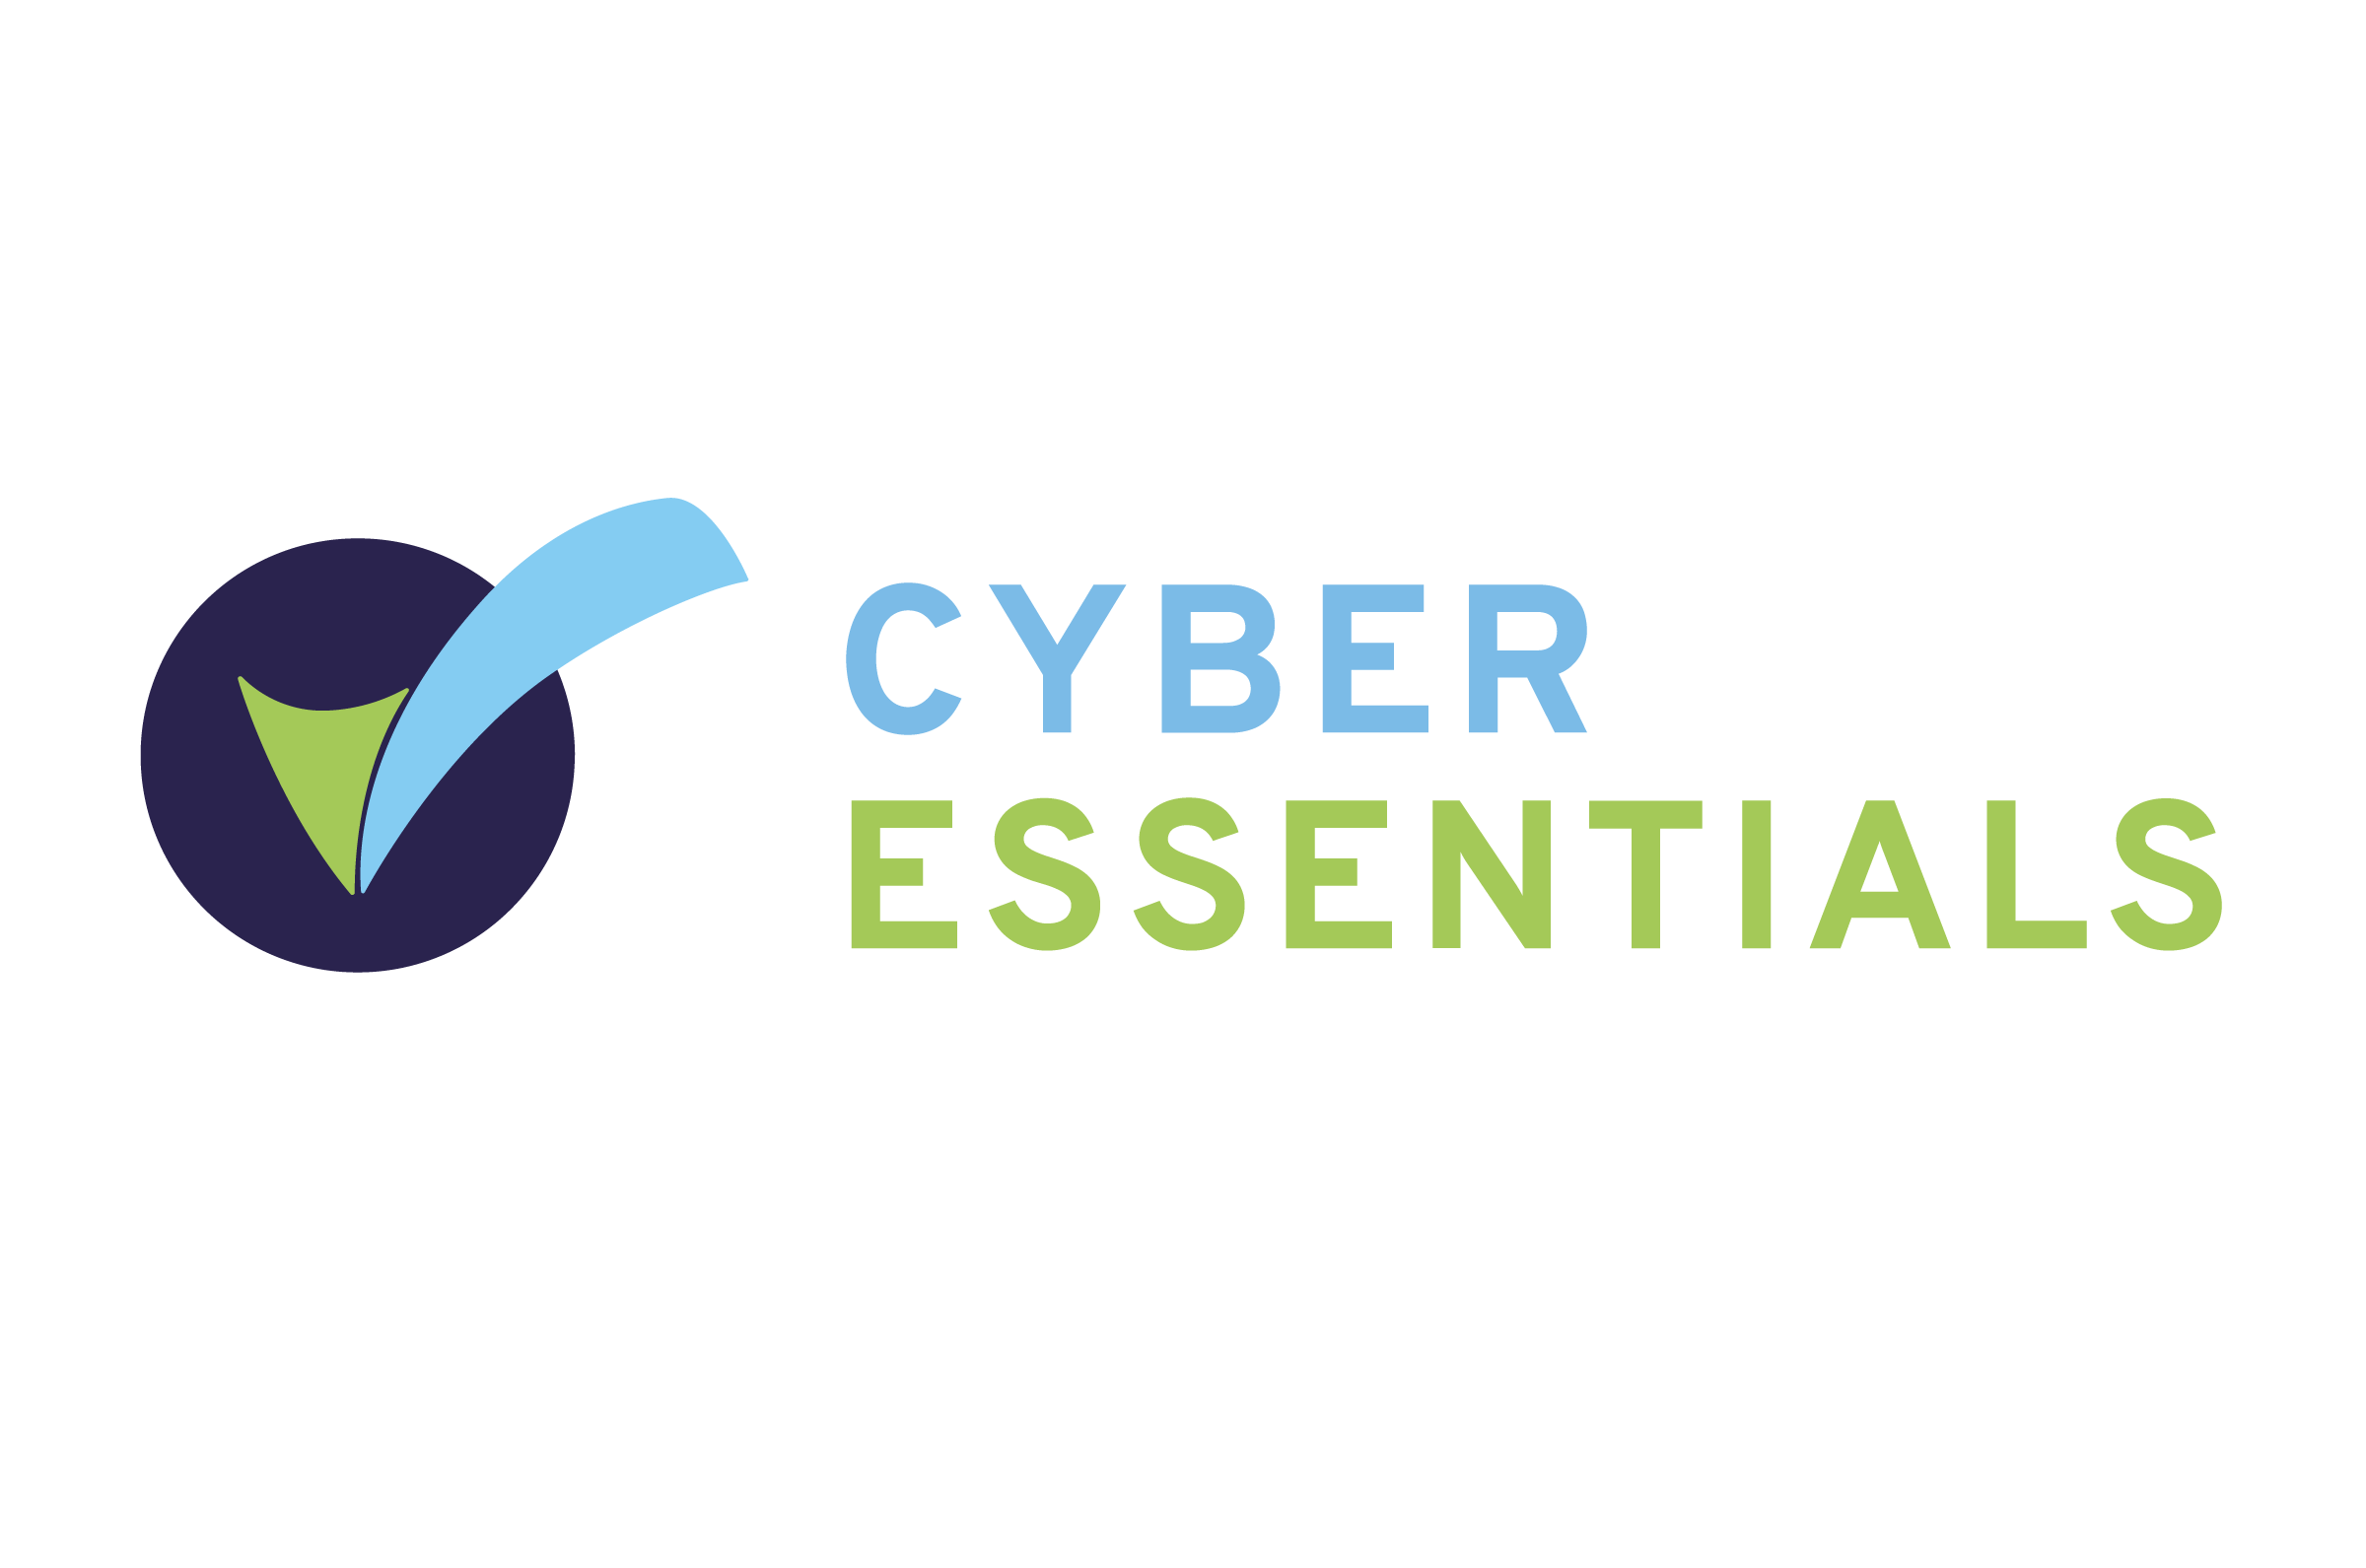 Cyber Essentials Certification now includes Cyber Insurance